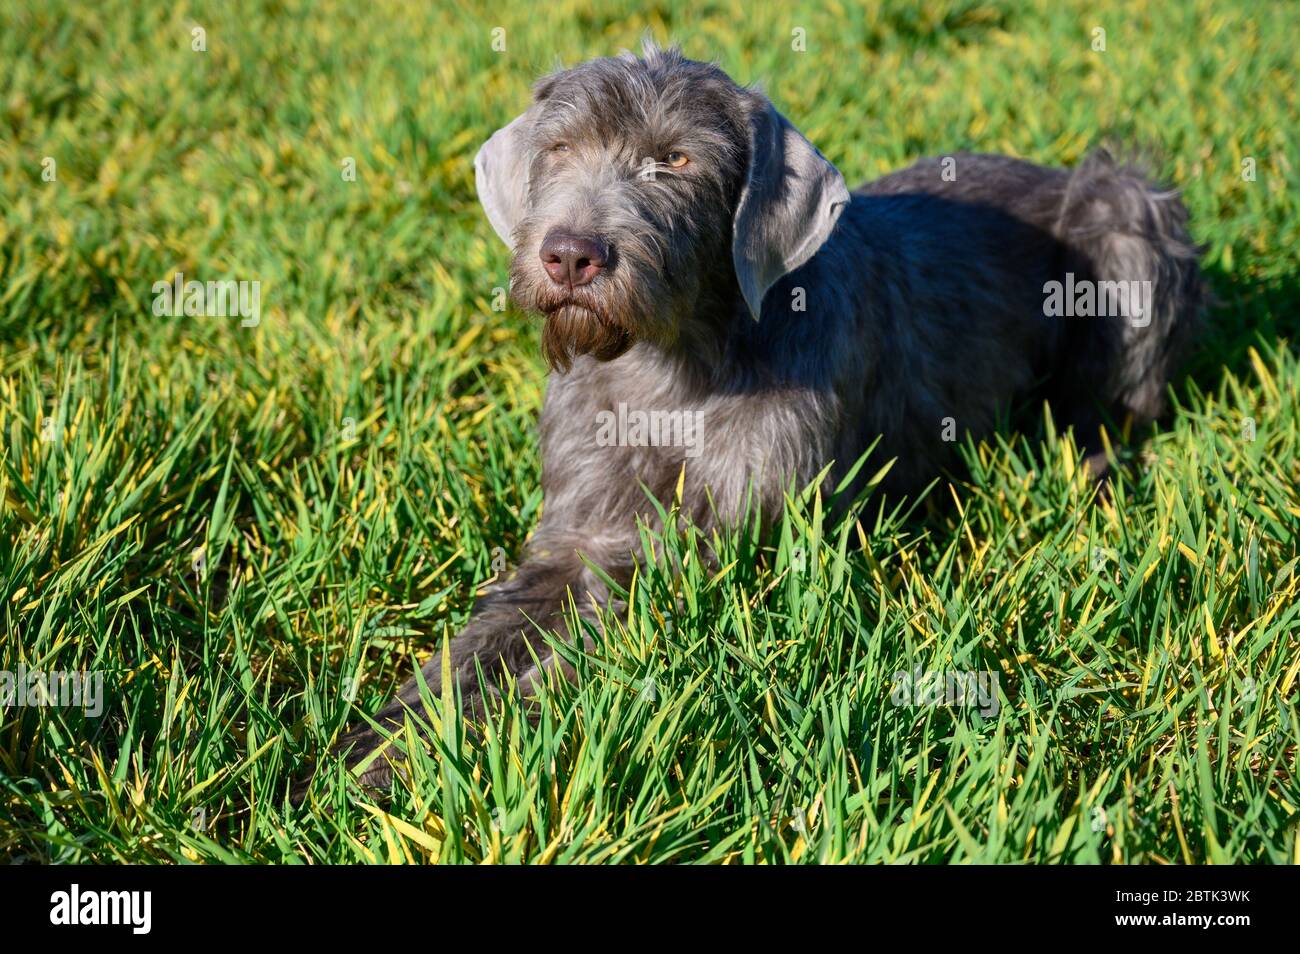 Grey-haired dog in the grass. The dog is of the breed: Slovak Rough-haired Pointer or Slovak Wirehaired Pointing Griffon. Stock Photo